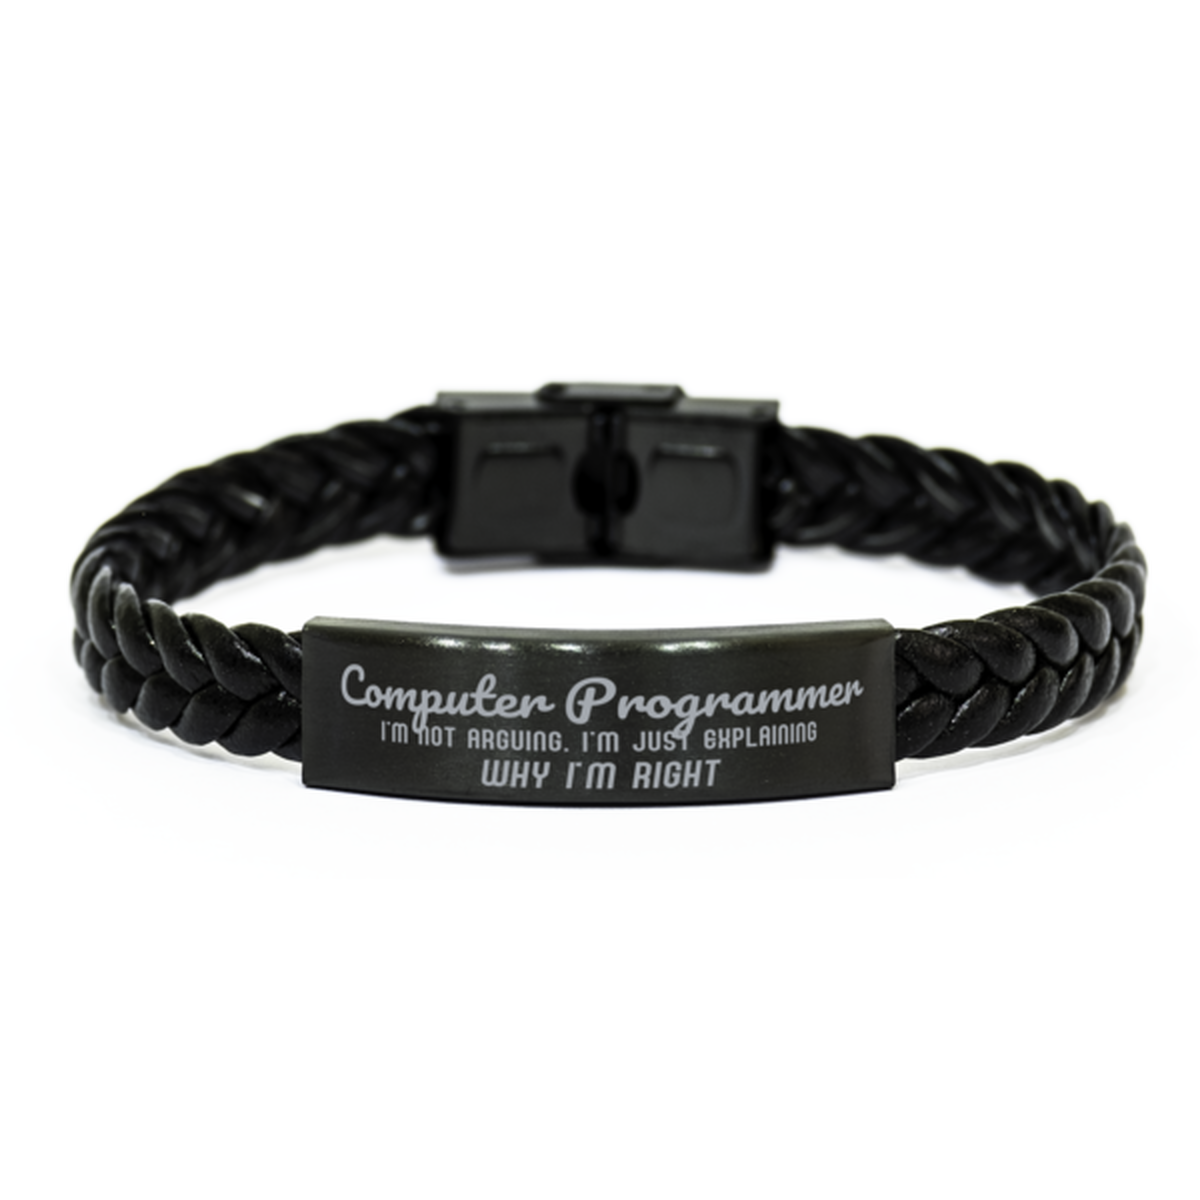 Computer Programmer I'm not Arguing. I'm Just Explaining Why I'm RIGHT Braided Leather Bracelet, Graduation Birthday Christmas Computer Programmer Gifts For Computer Programmer Funny Saying Quote Present for Men Women Coworker